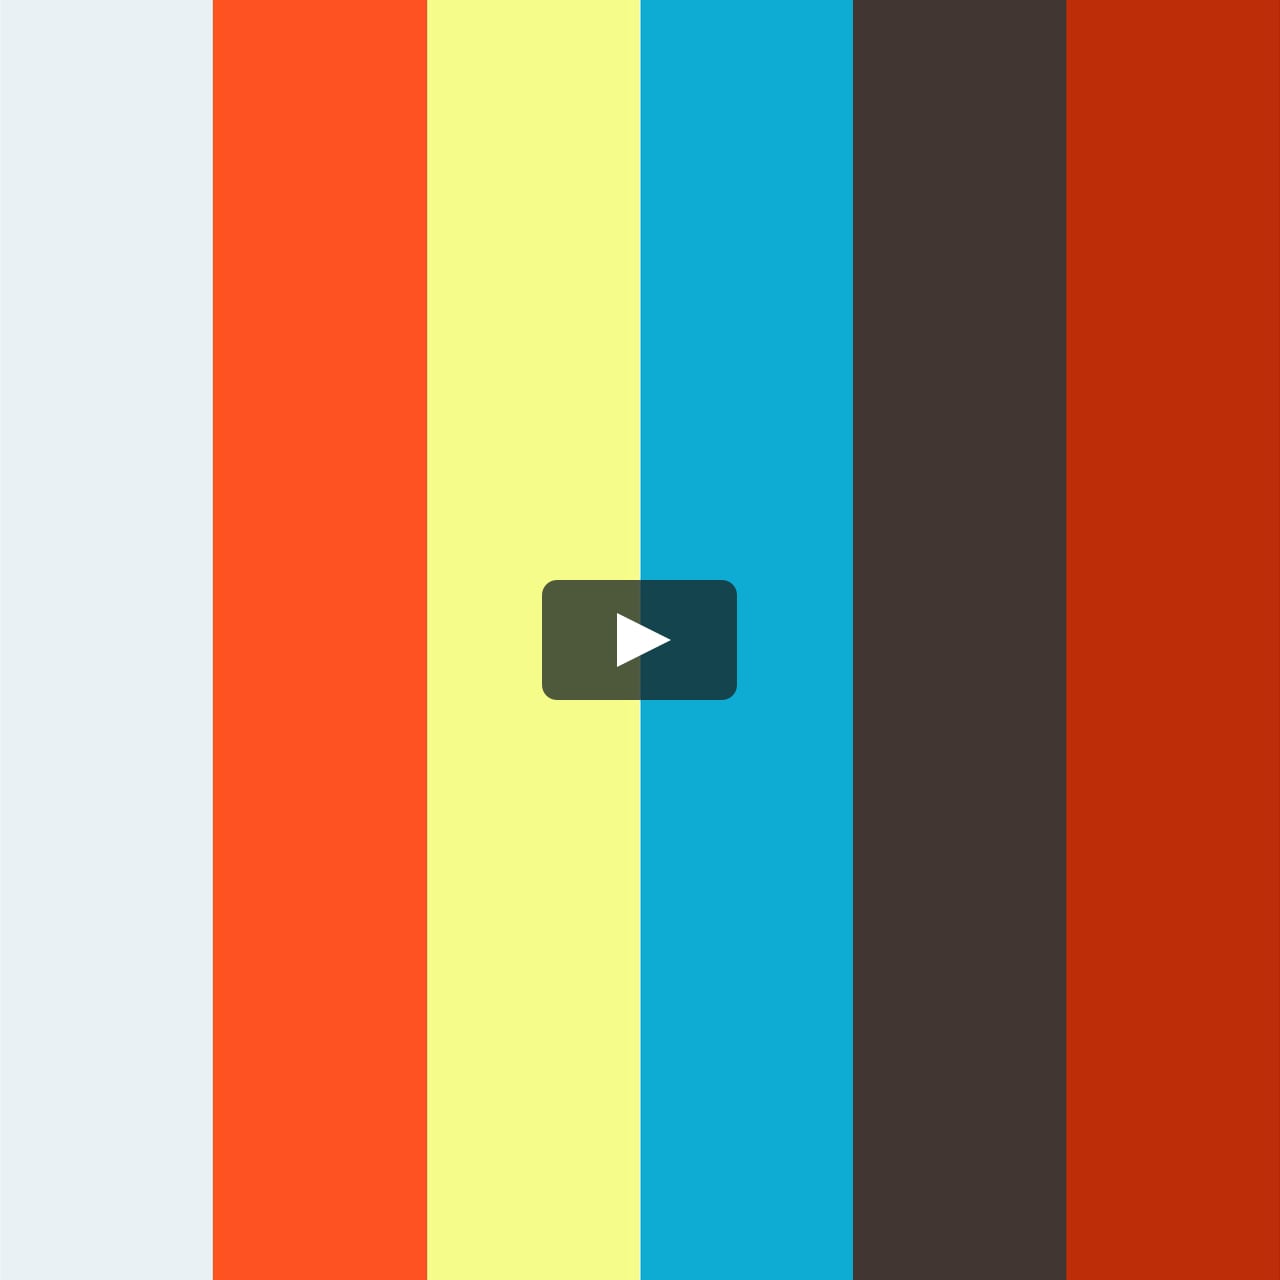 The Final Straw English Idiom Meaning On Vimeo